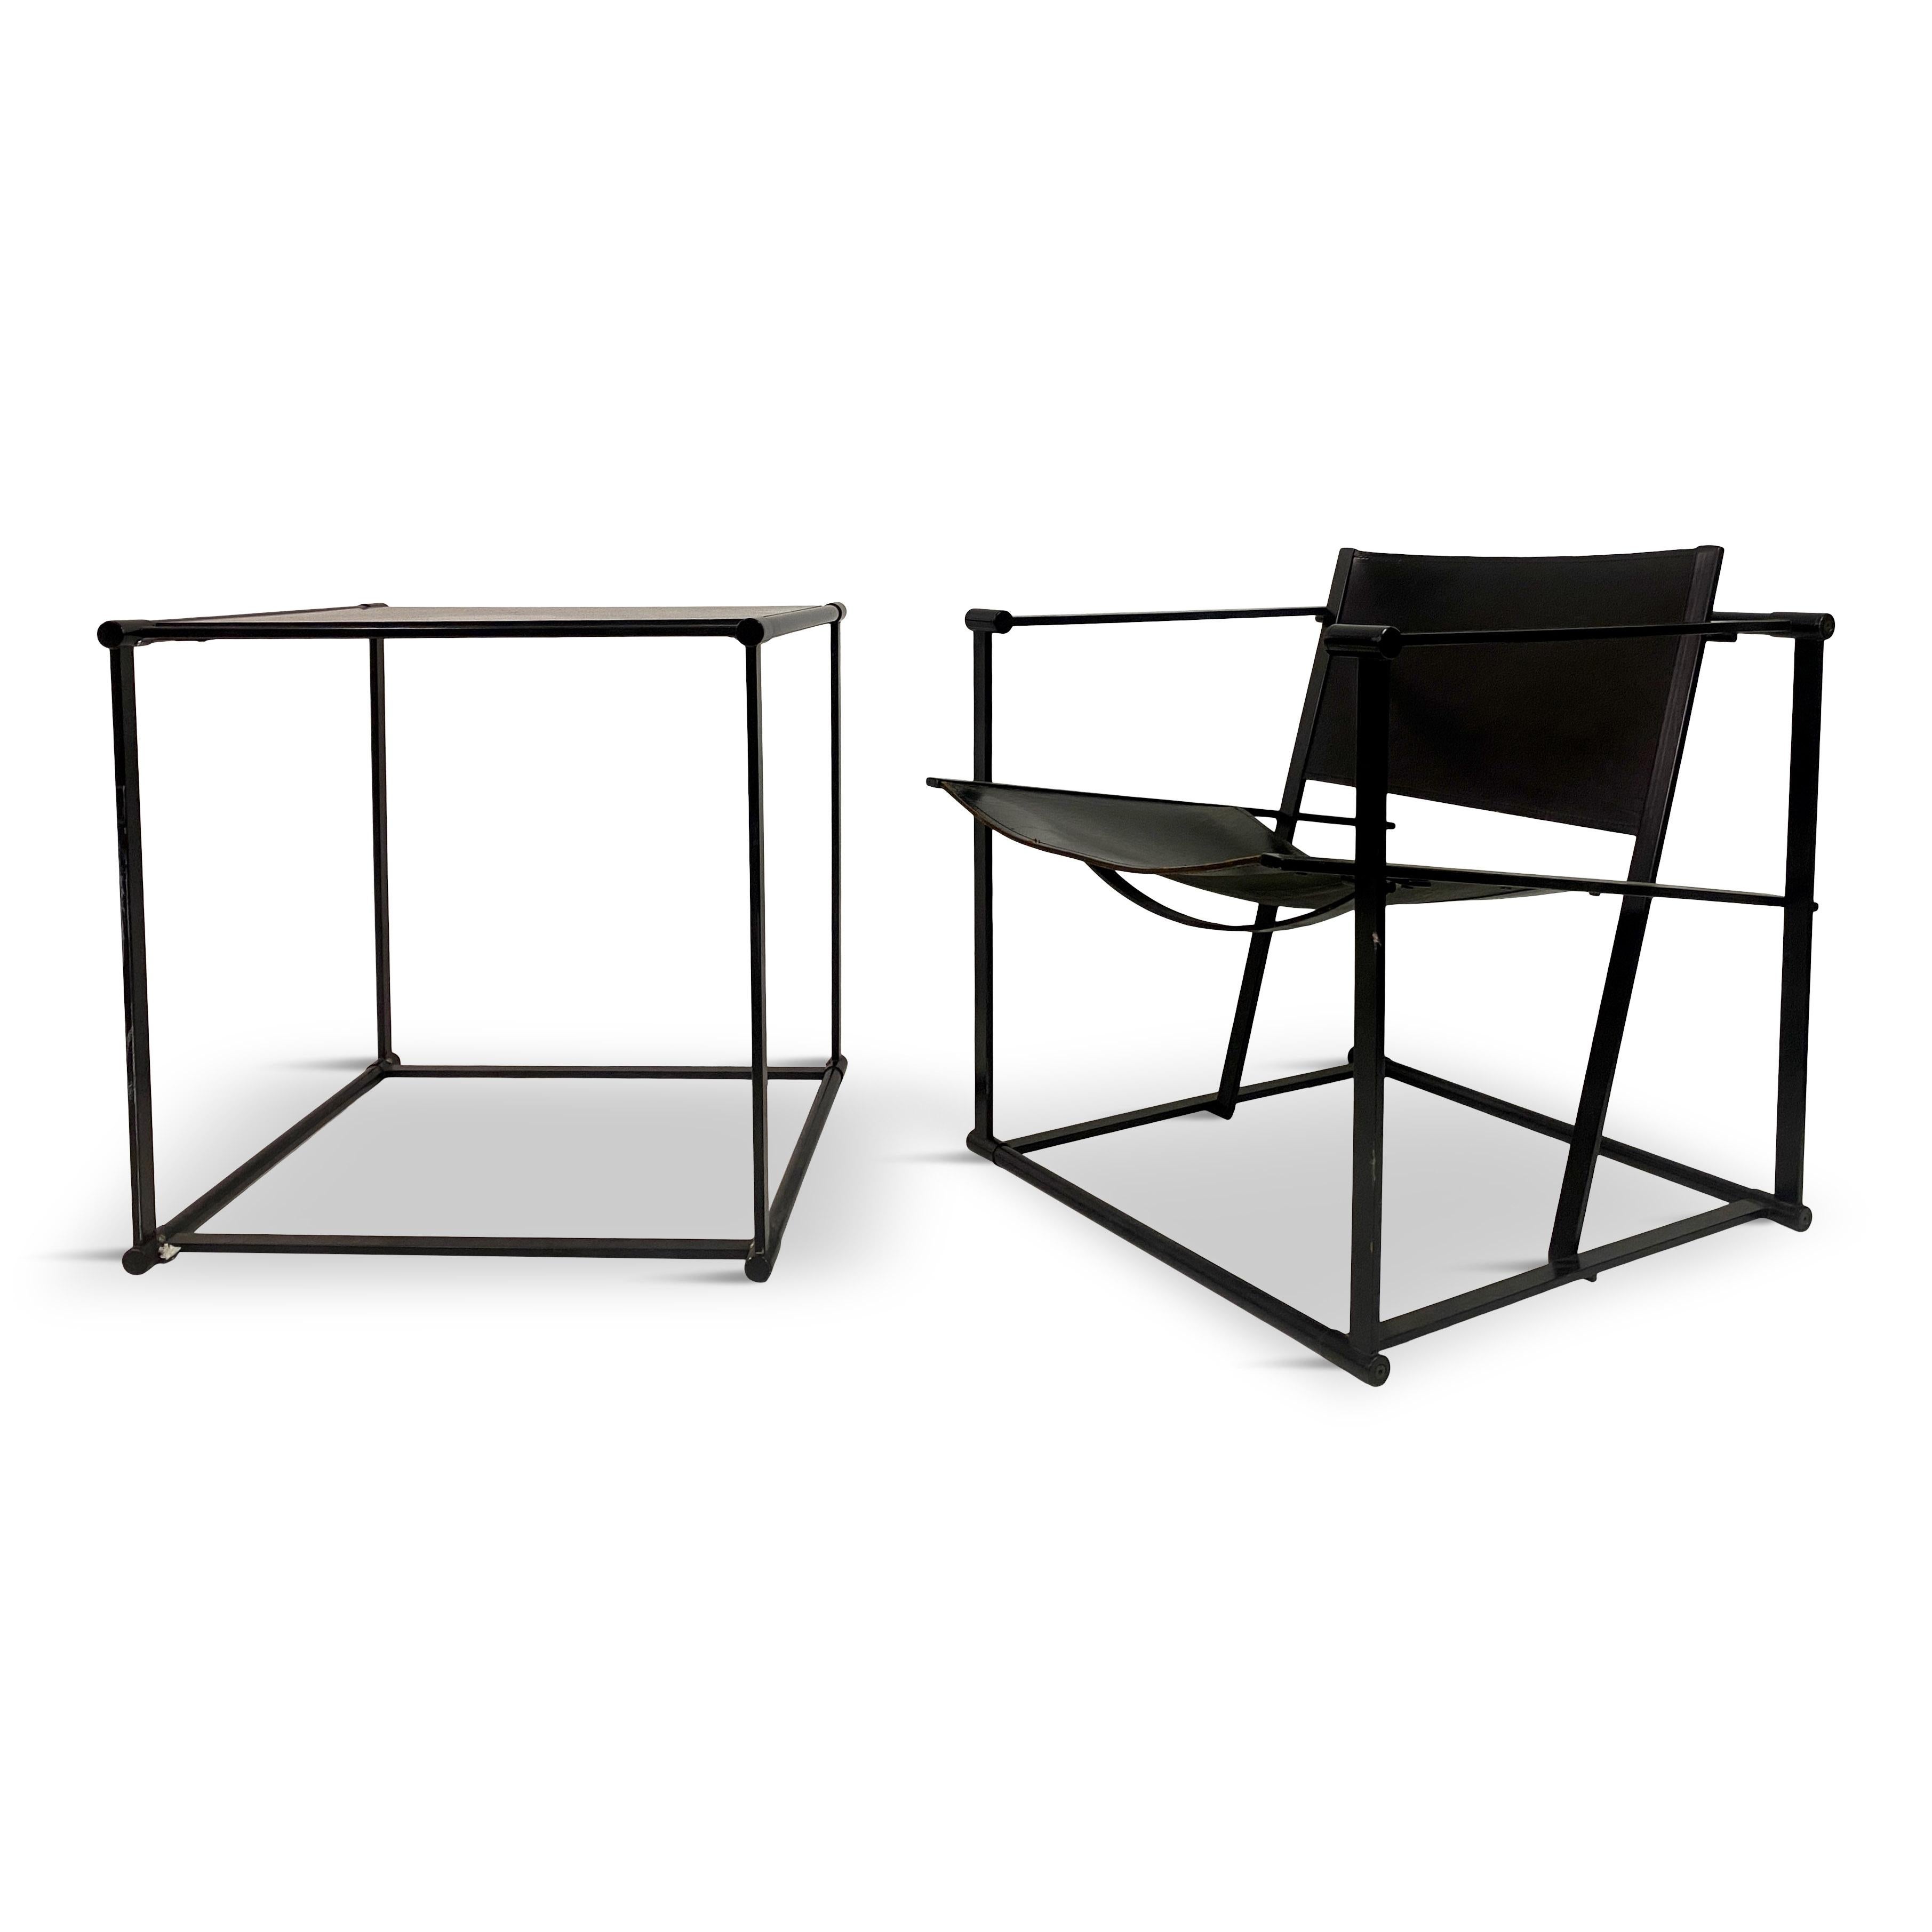 Cube lounge chair and table designed by Radboud Van Beekum for Pastoe, The Netherlands, 1980s. 

The armchair and table has a strong, geometric character. Following in the tradition of the De Stijl movement, the FM60 series is inspired by the